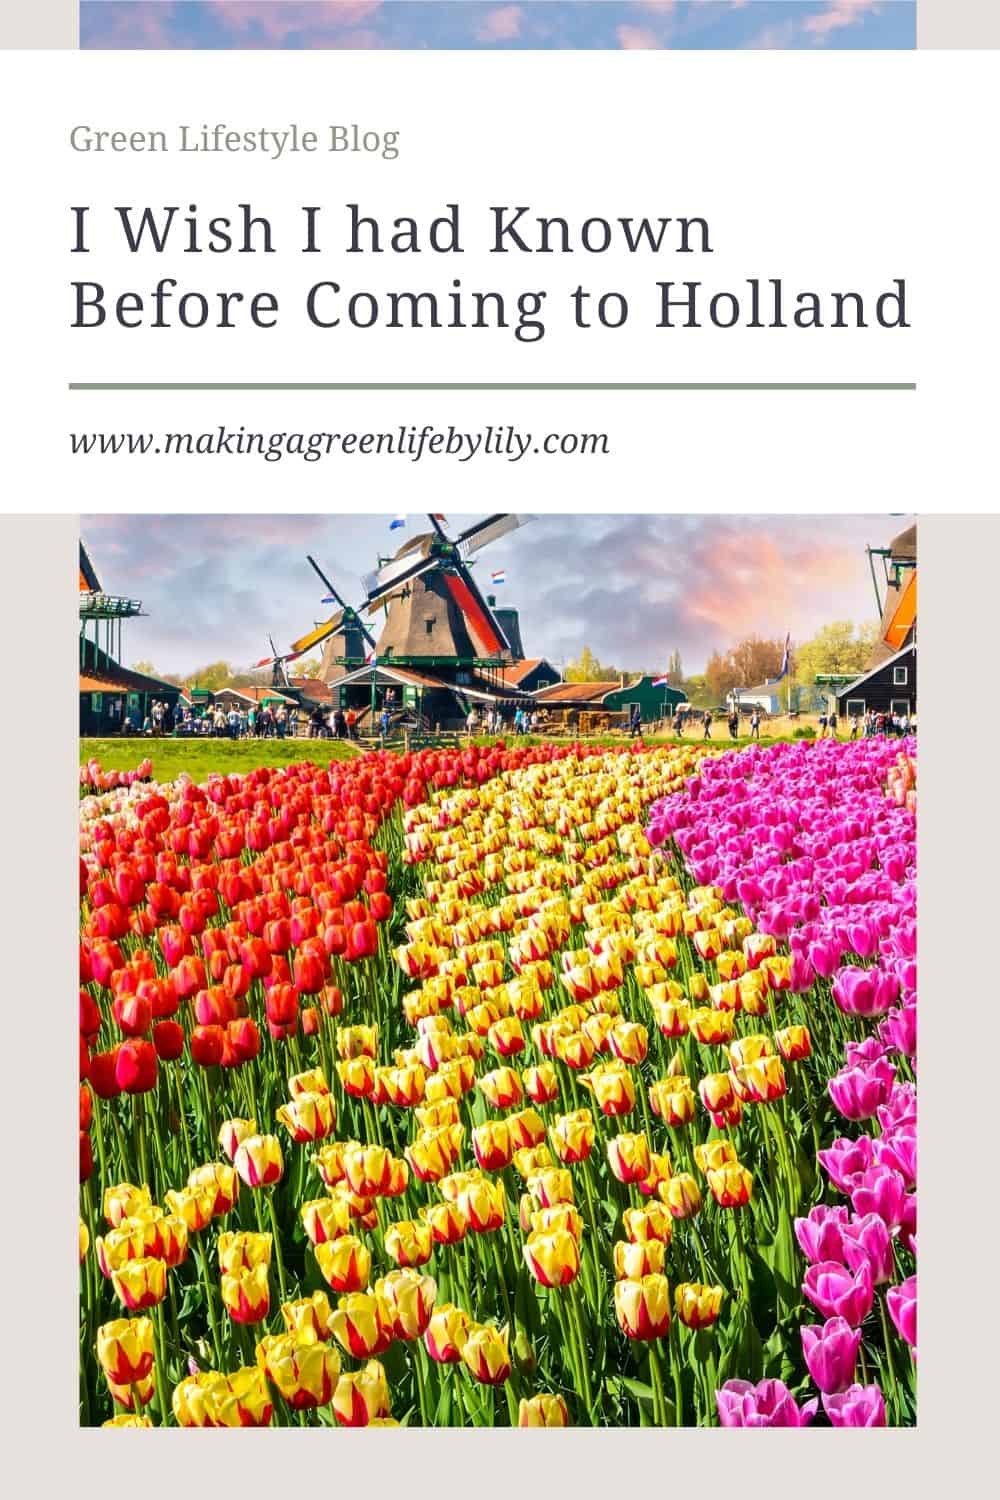 I wish i had known before coming to Holland